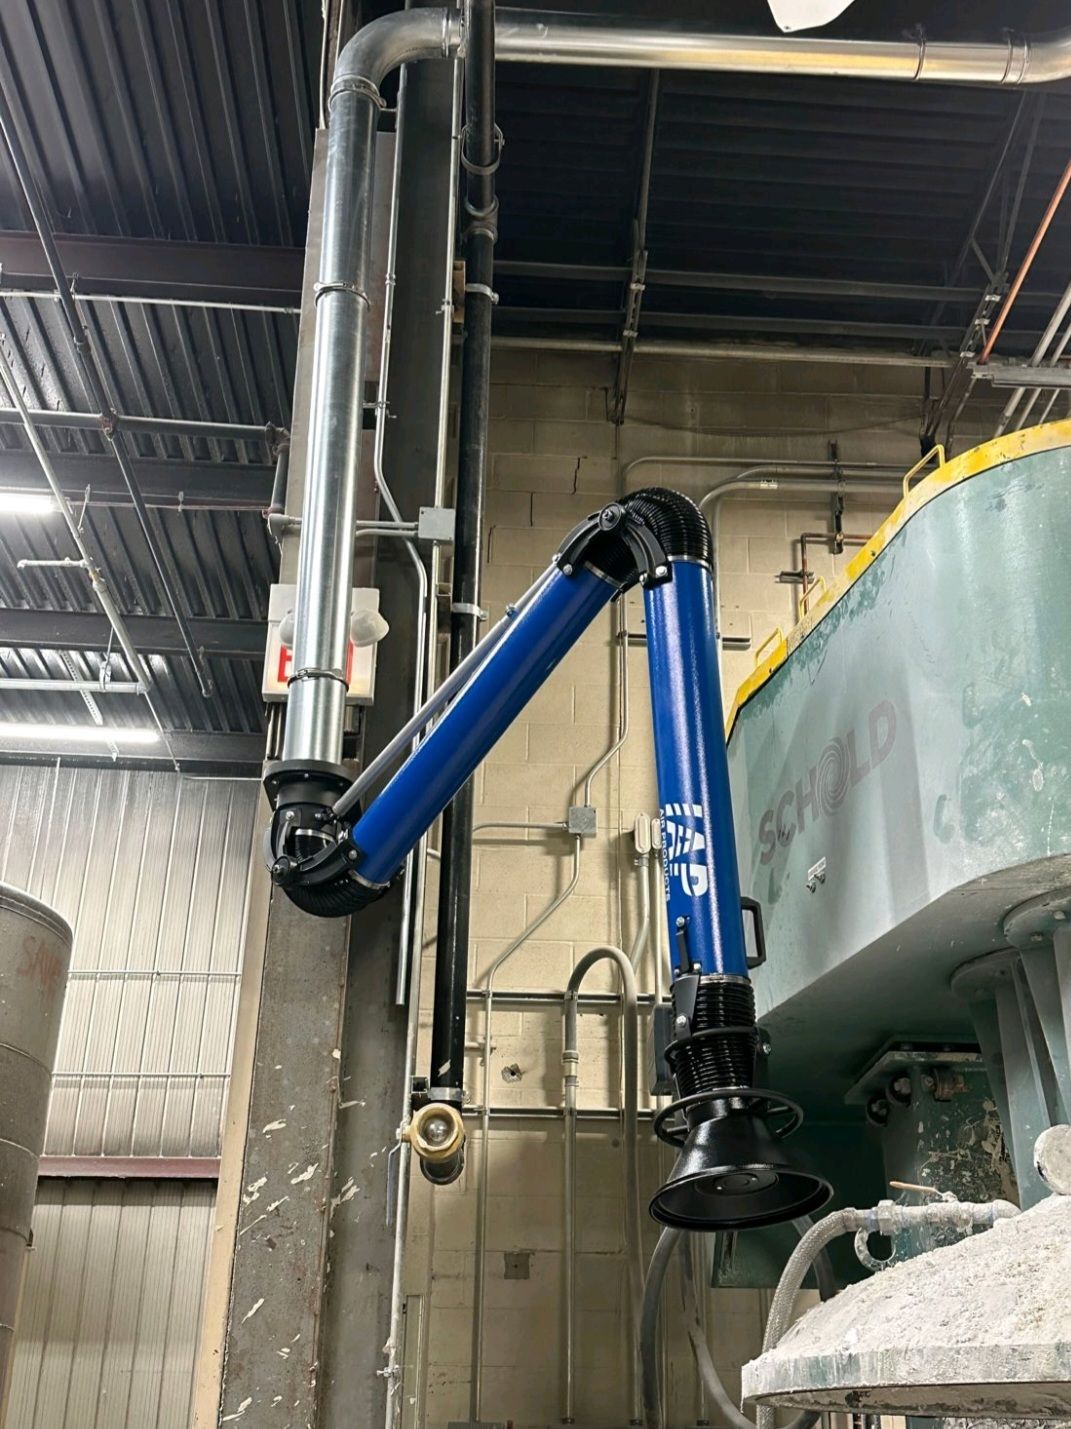 Extraction fume arms installed in manufacturing plant